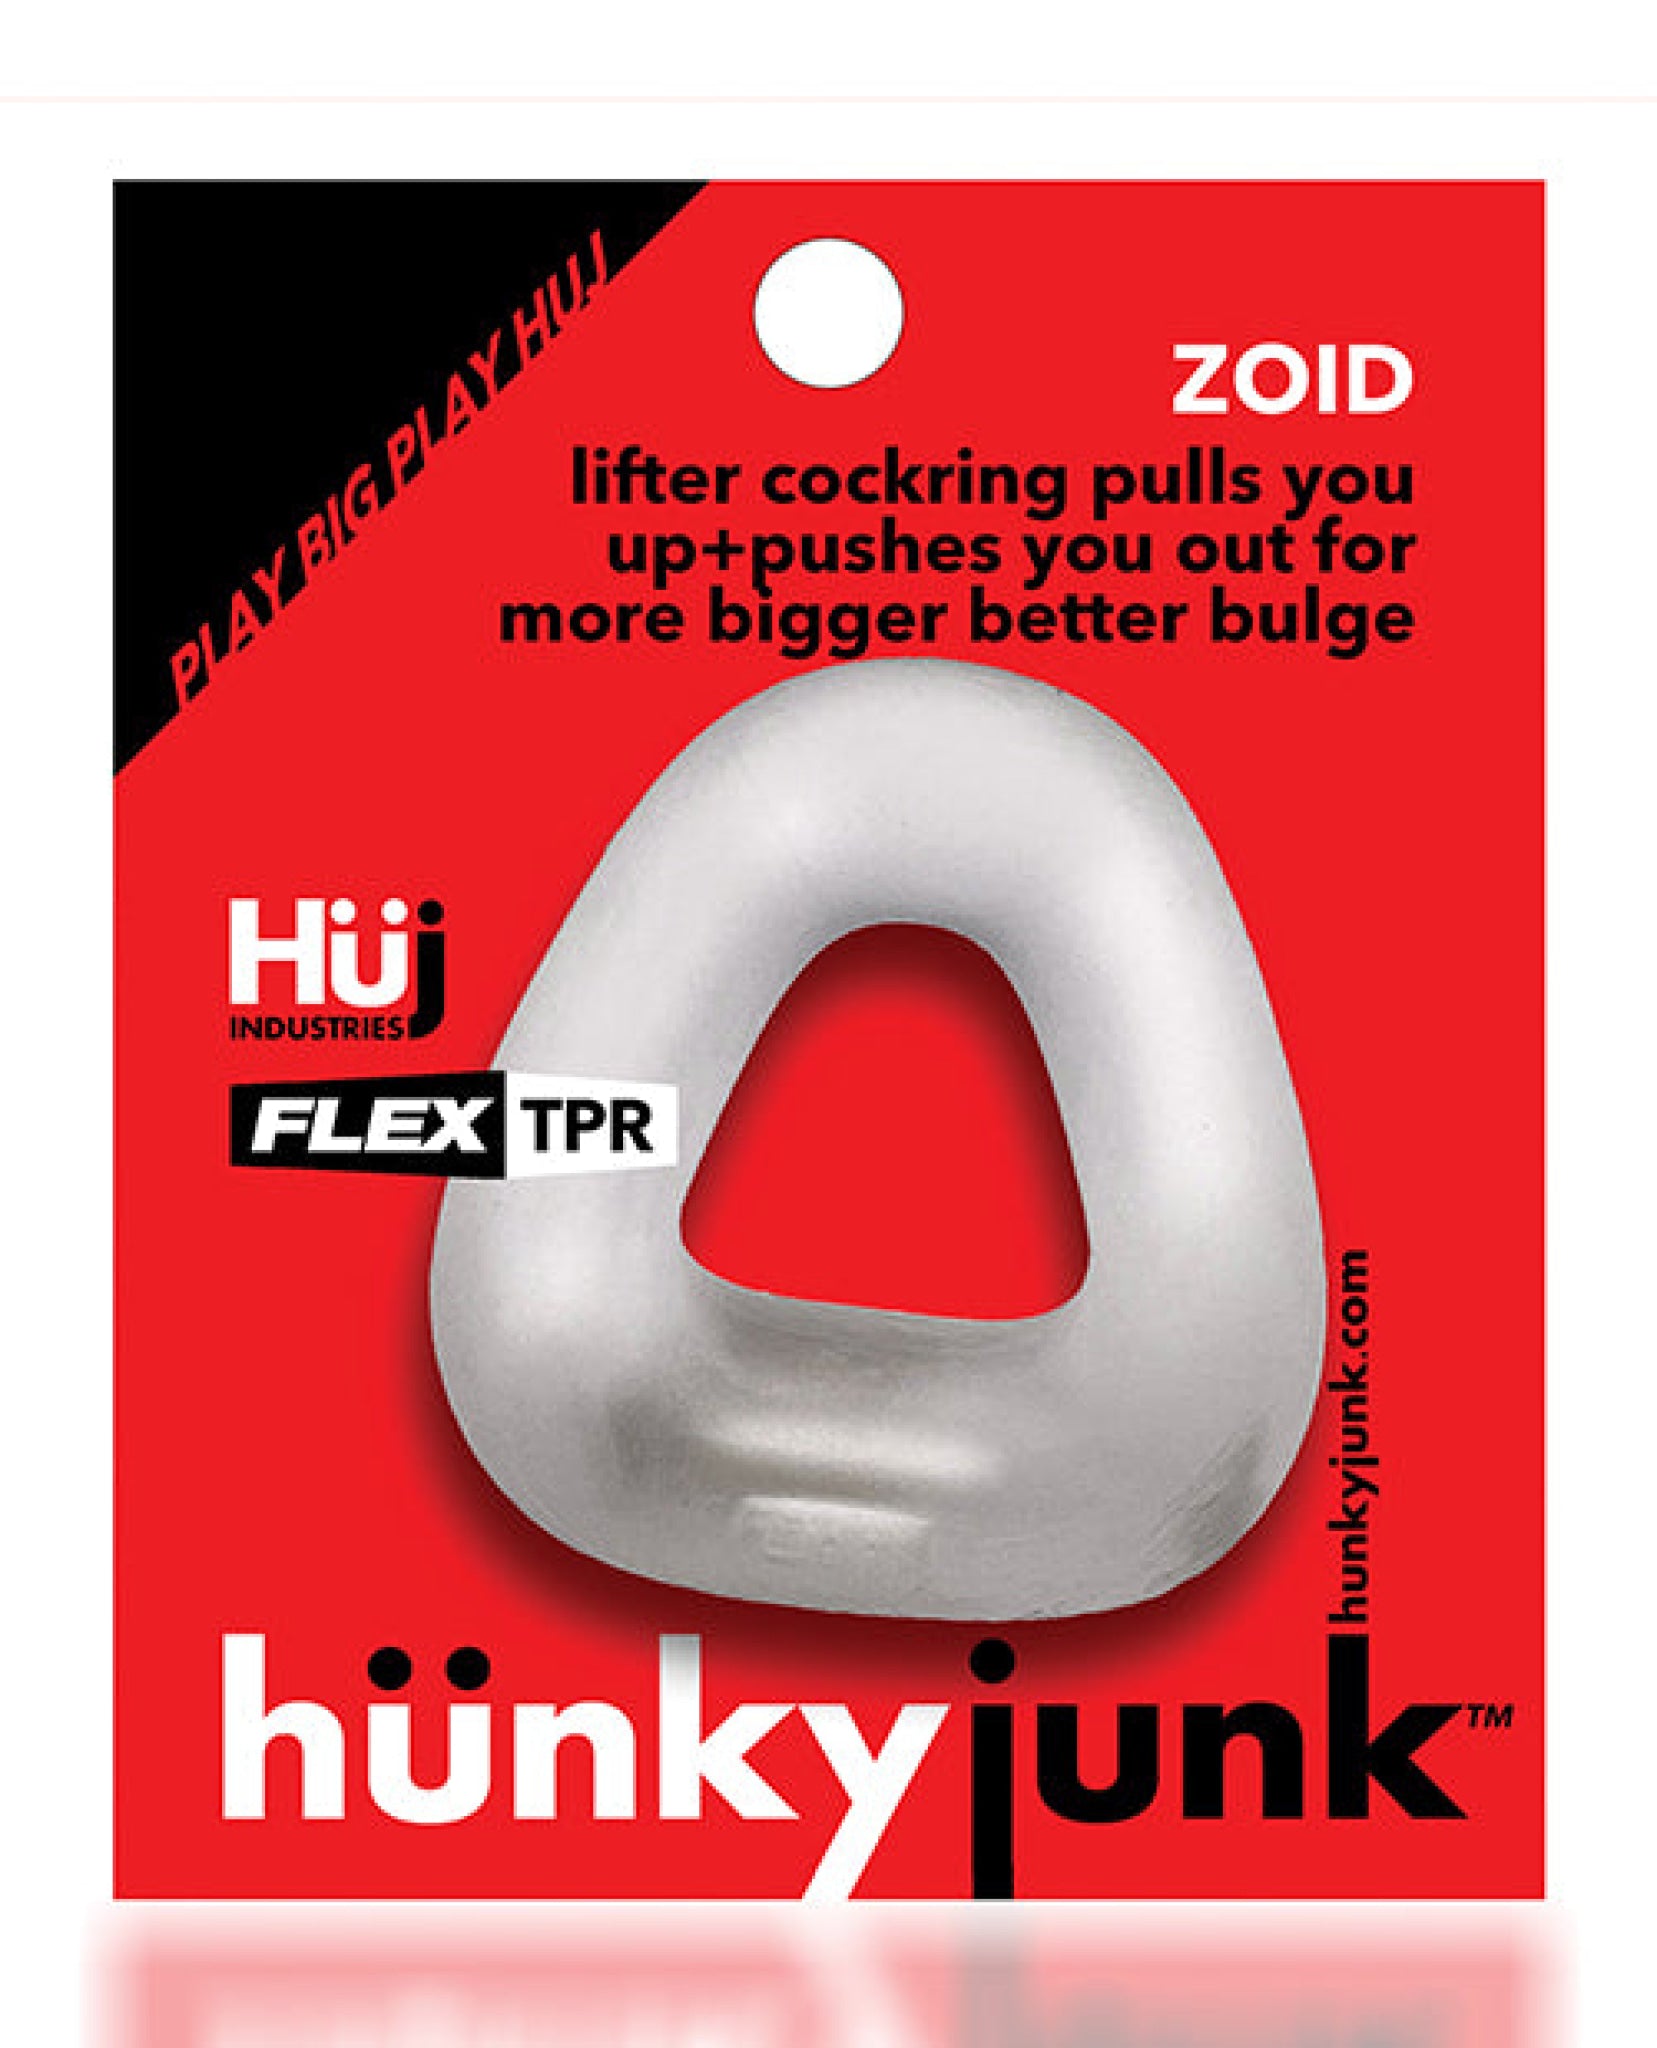 Hunky Junk Zoid Lifter Cockring - Ice Hunky Junk